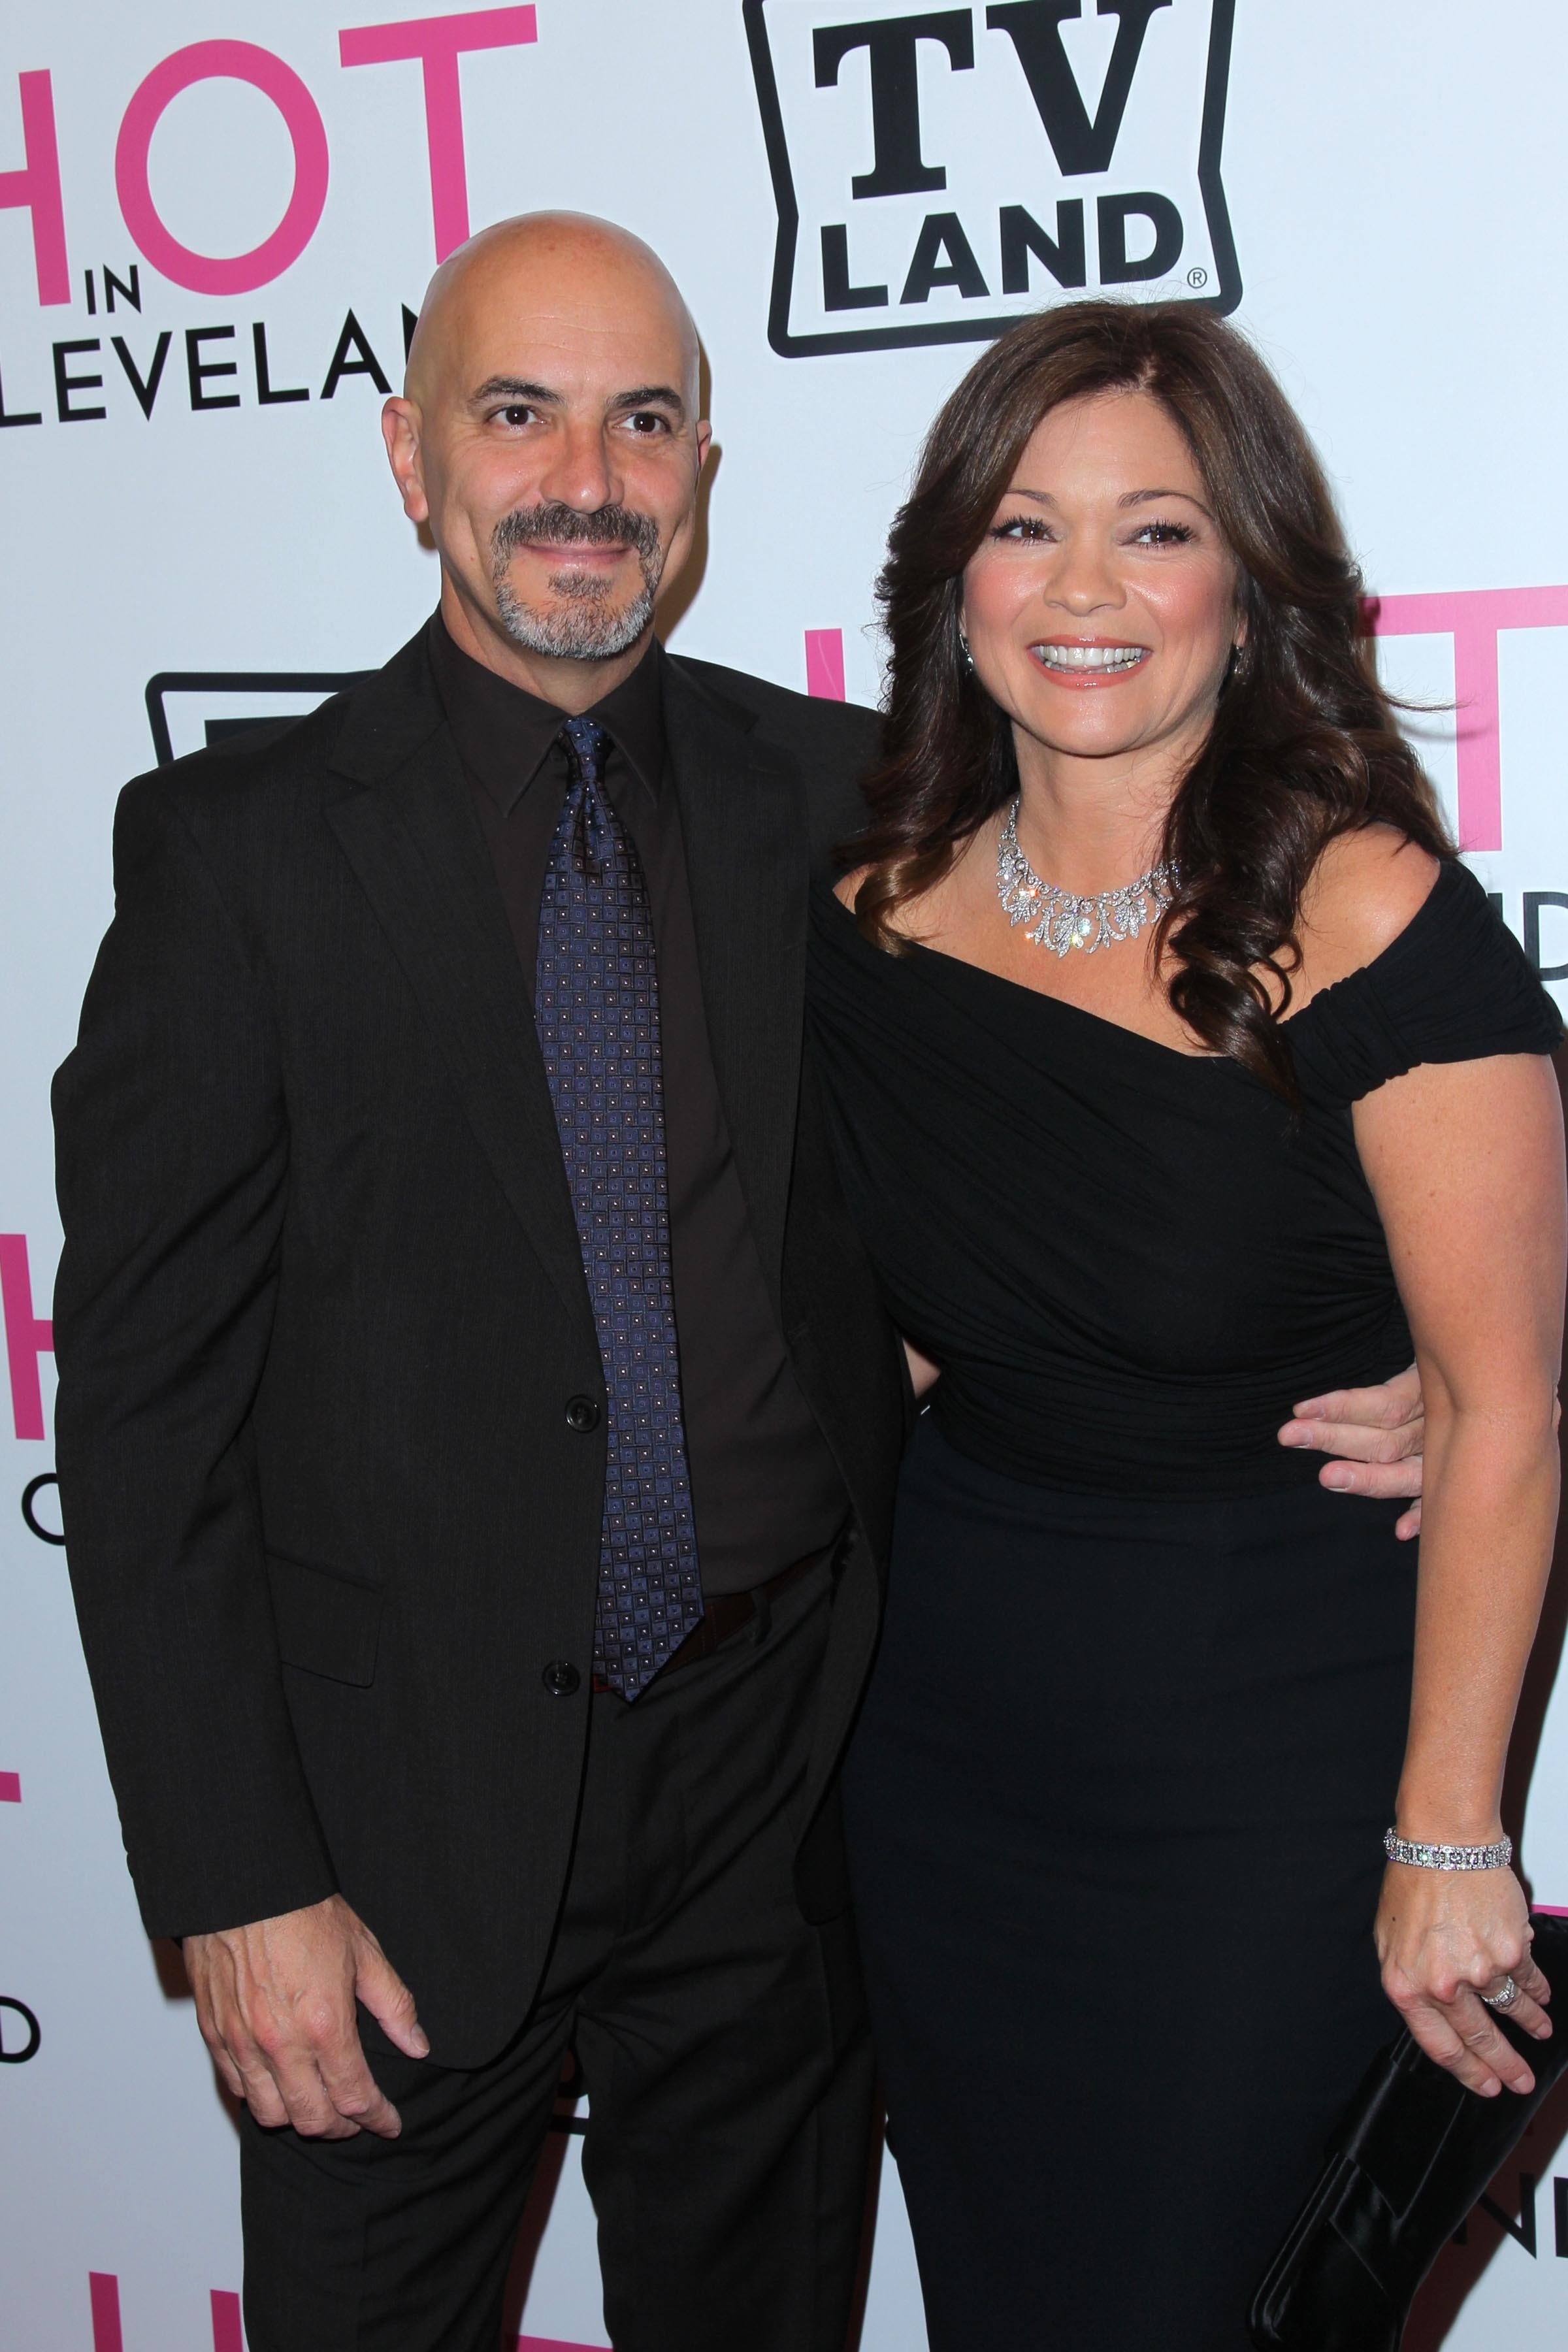 Tom Vitale and Valerie Bertinelli attending TV Land Hosts a Premiere Party and Screening of "Hot in Cleveland" at Crosby Street Hotel on June 14, 2010 in New York City. / Source: Getty Images